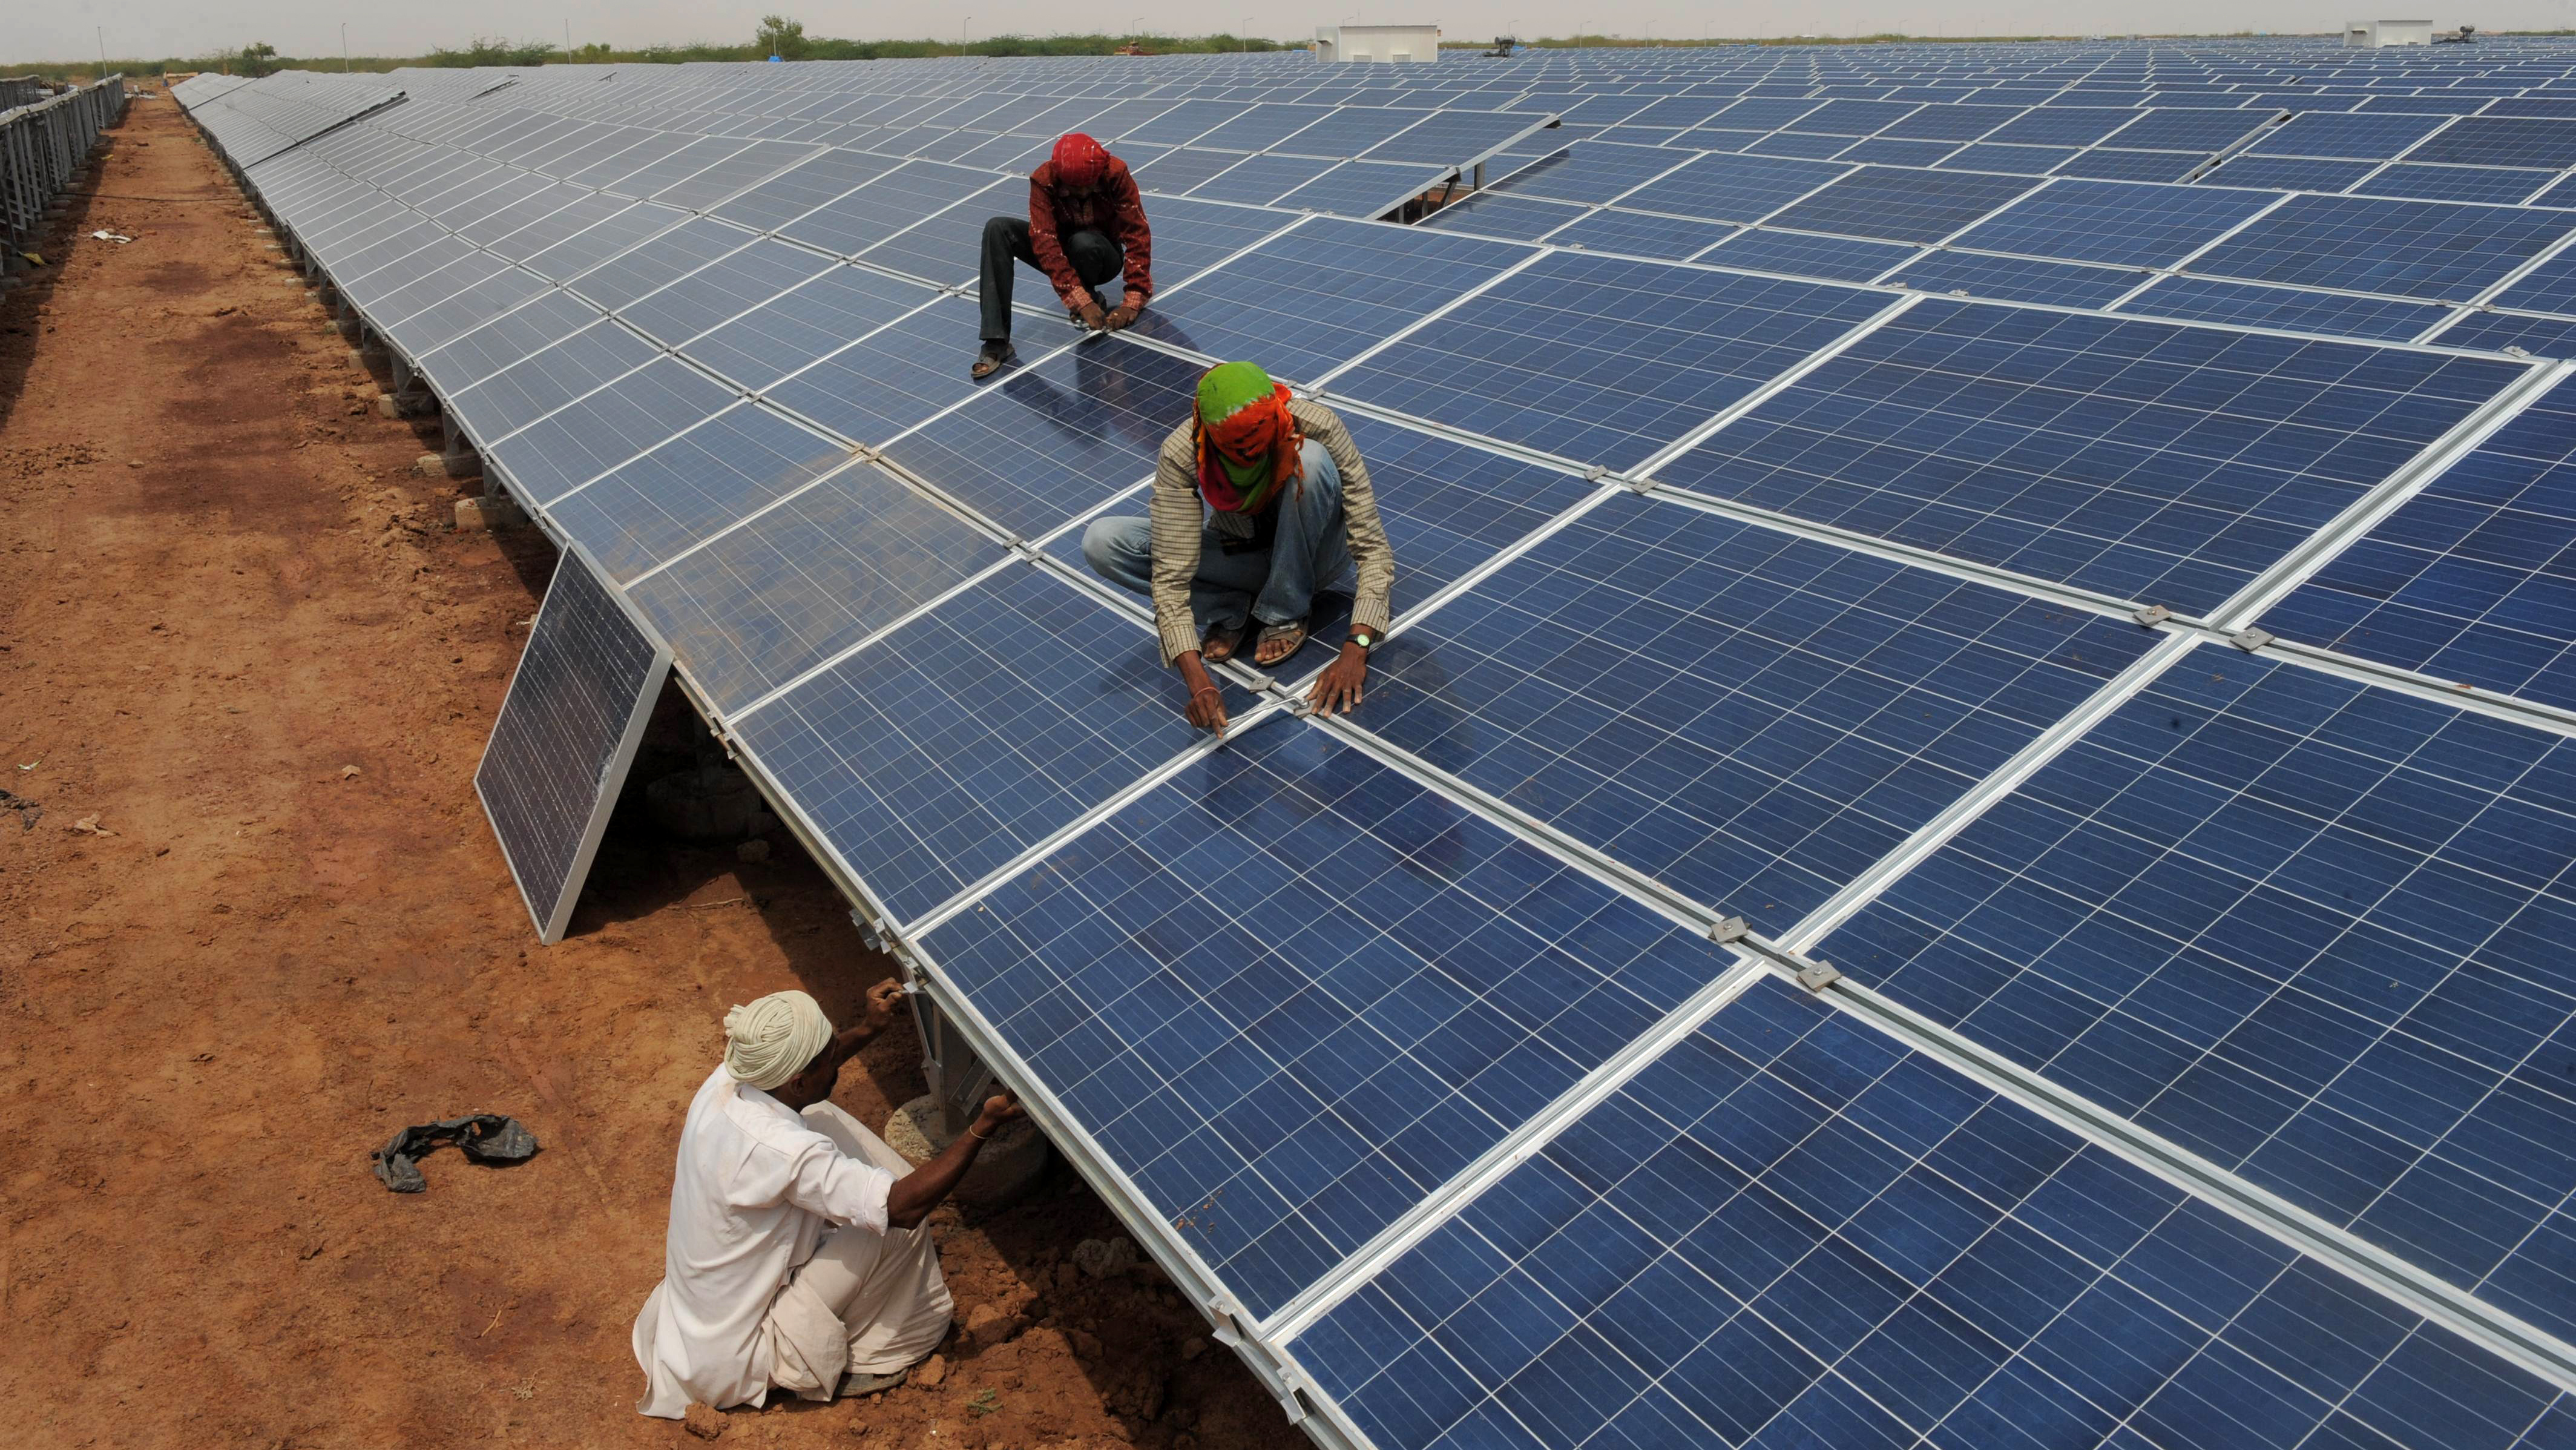 India launches the largest solar plant in the world